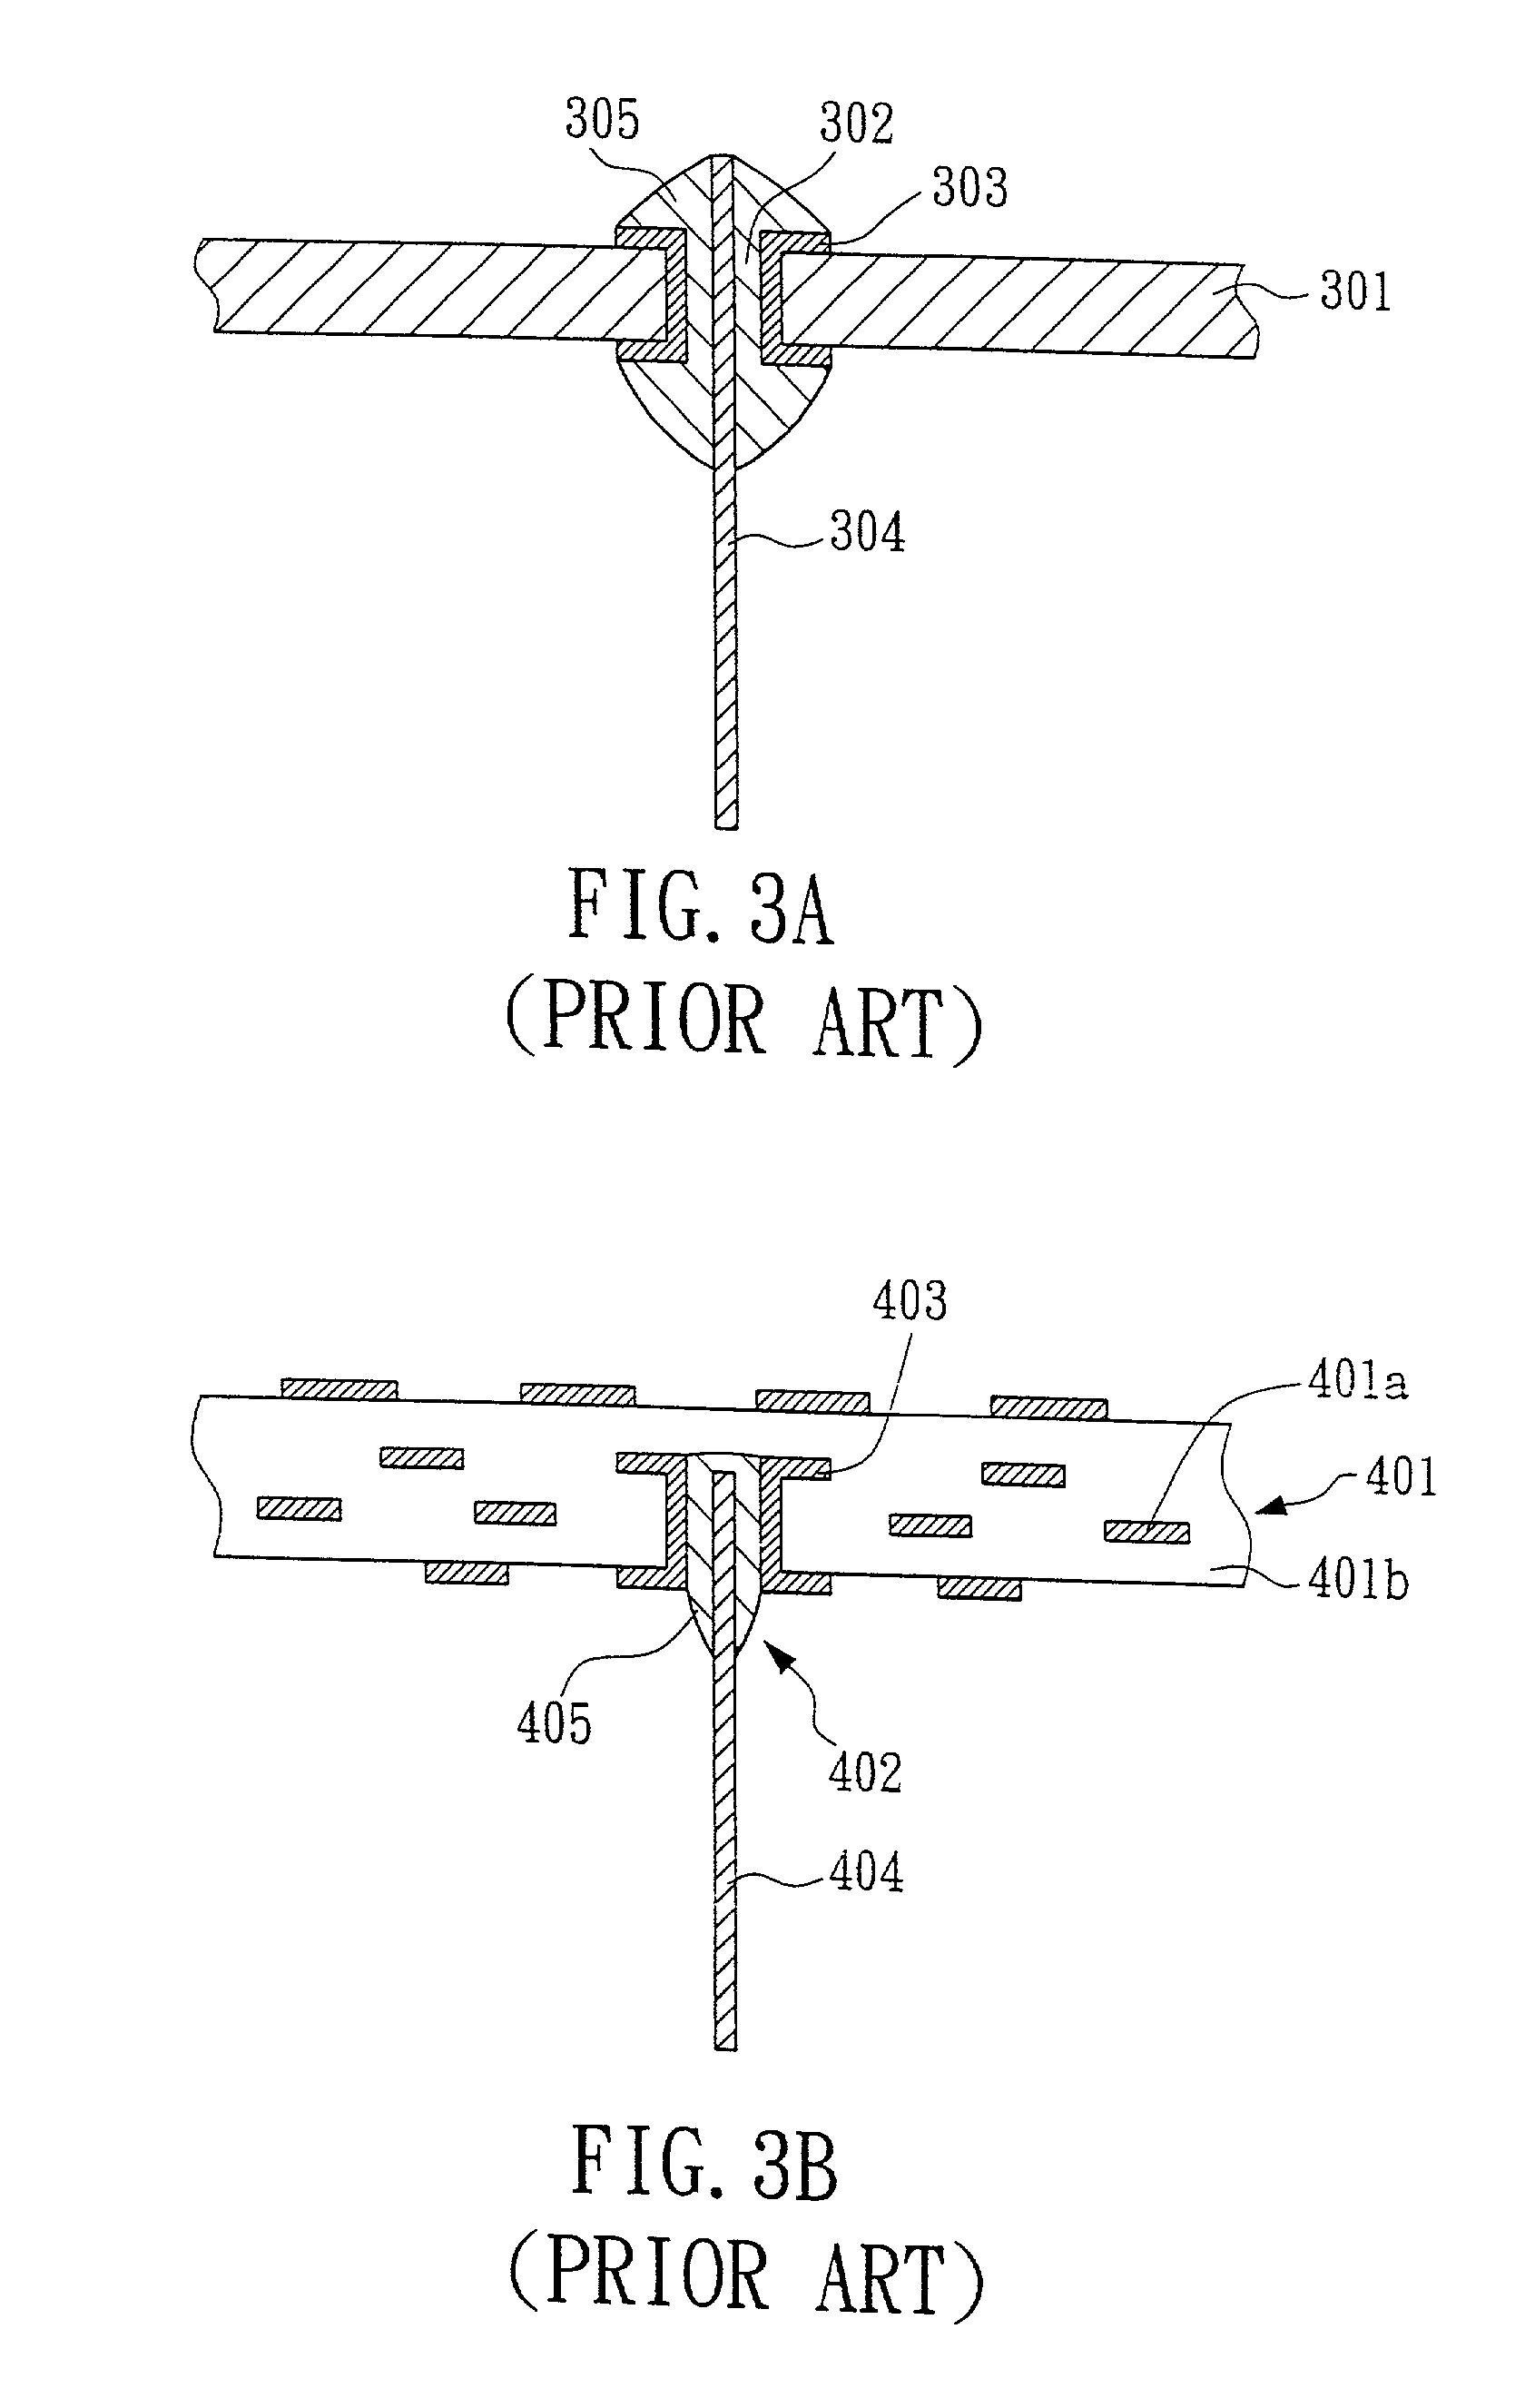 Pin attachment by a surface mounting method for fabricating organic pin grid array packages